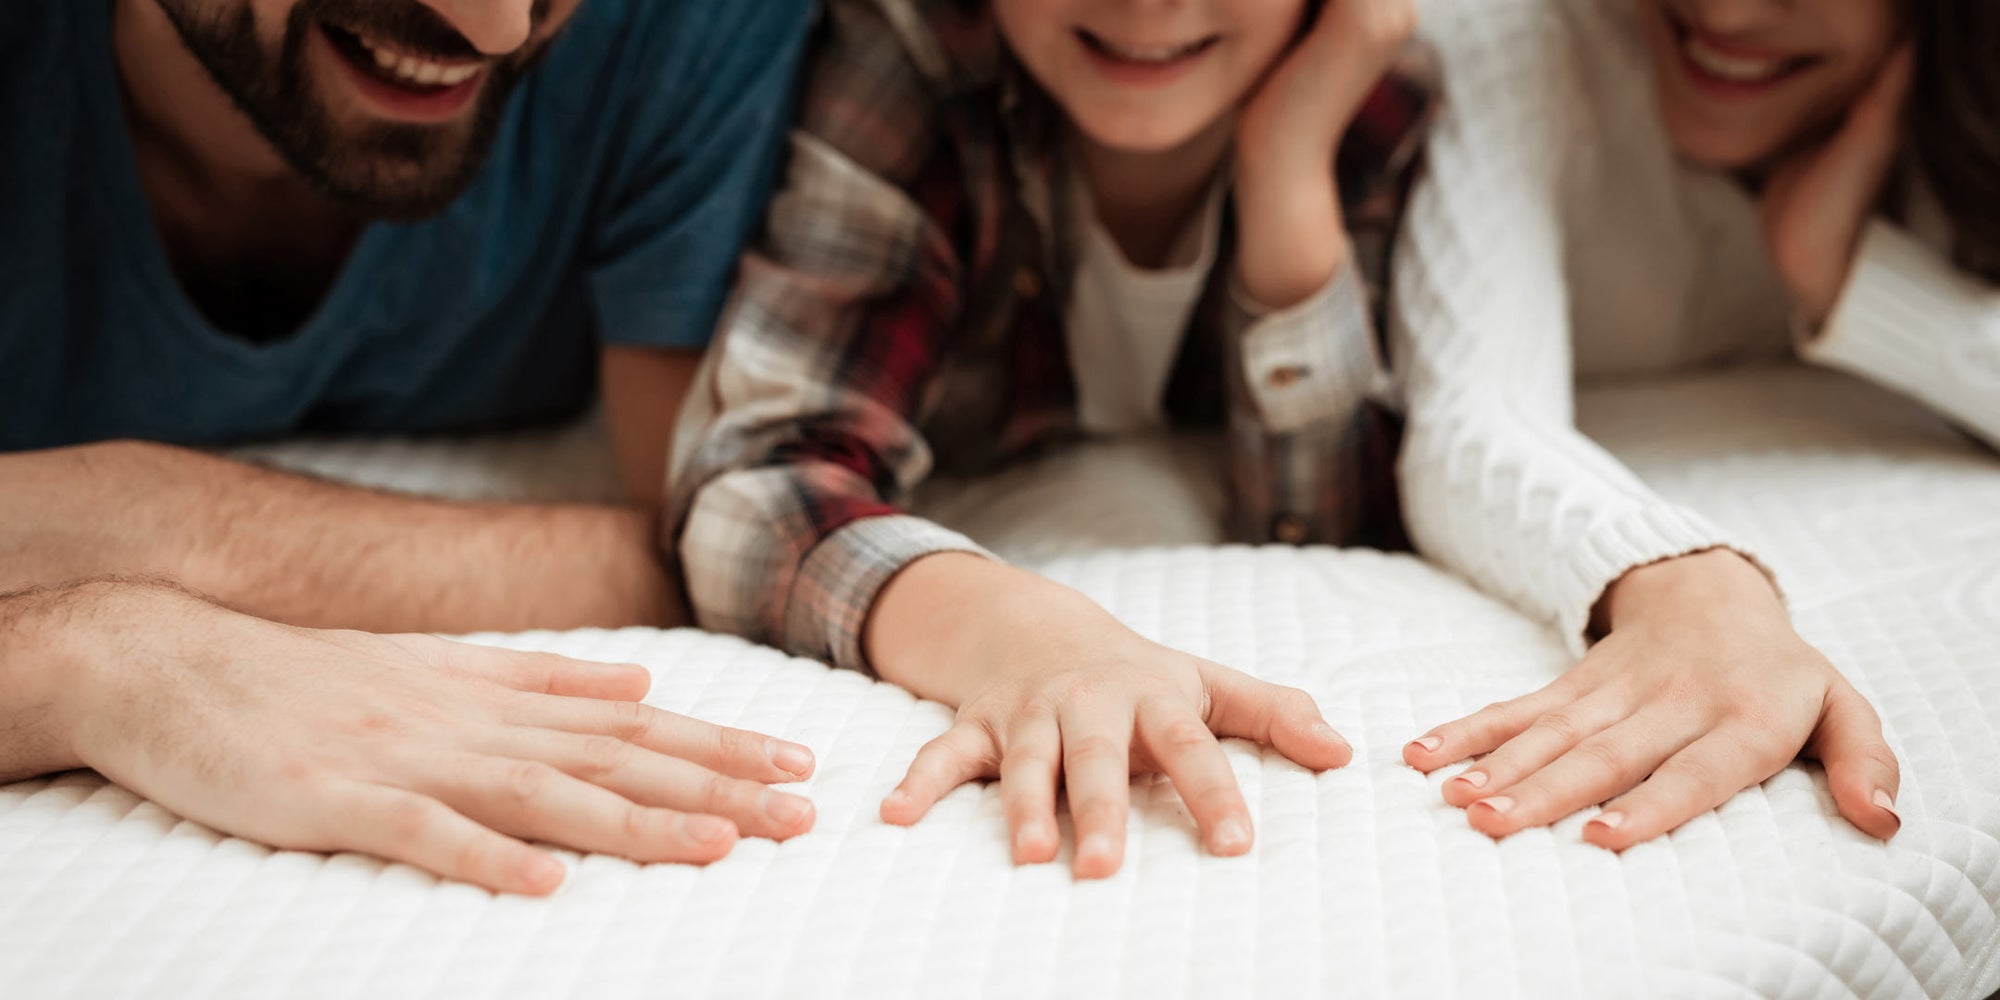 3 Easy Ways to Make a New Mattress Softer